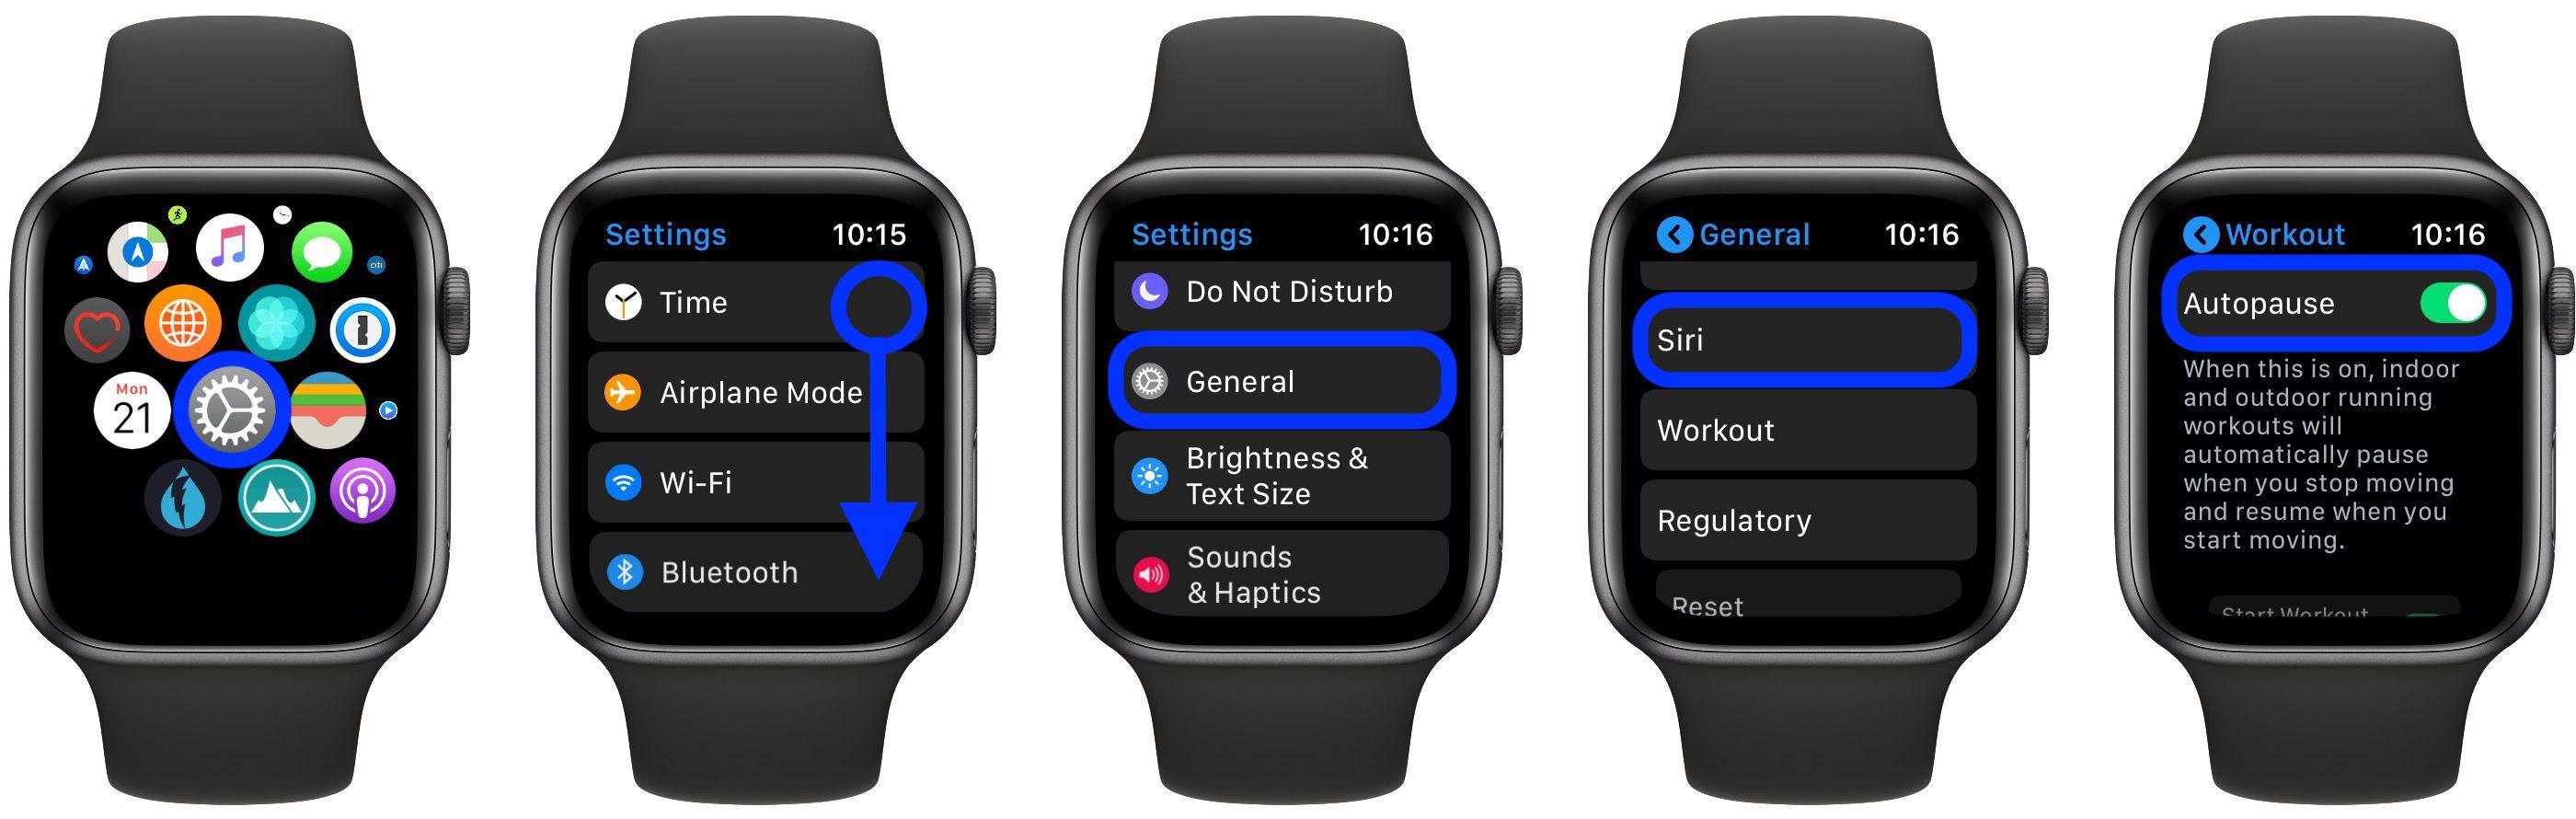 6 Day How To Track Beachbody Workouts On Apple Watch for Push Pull Legs